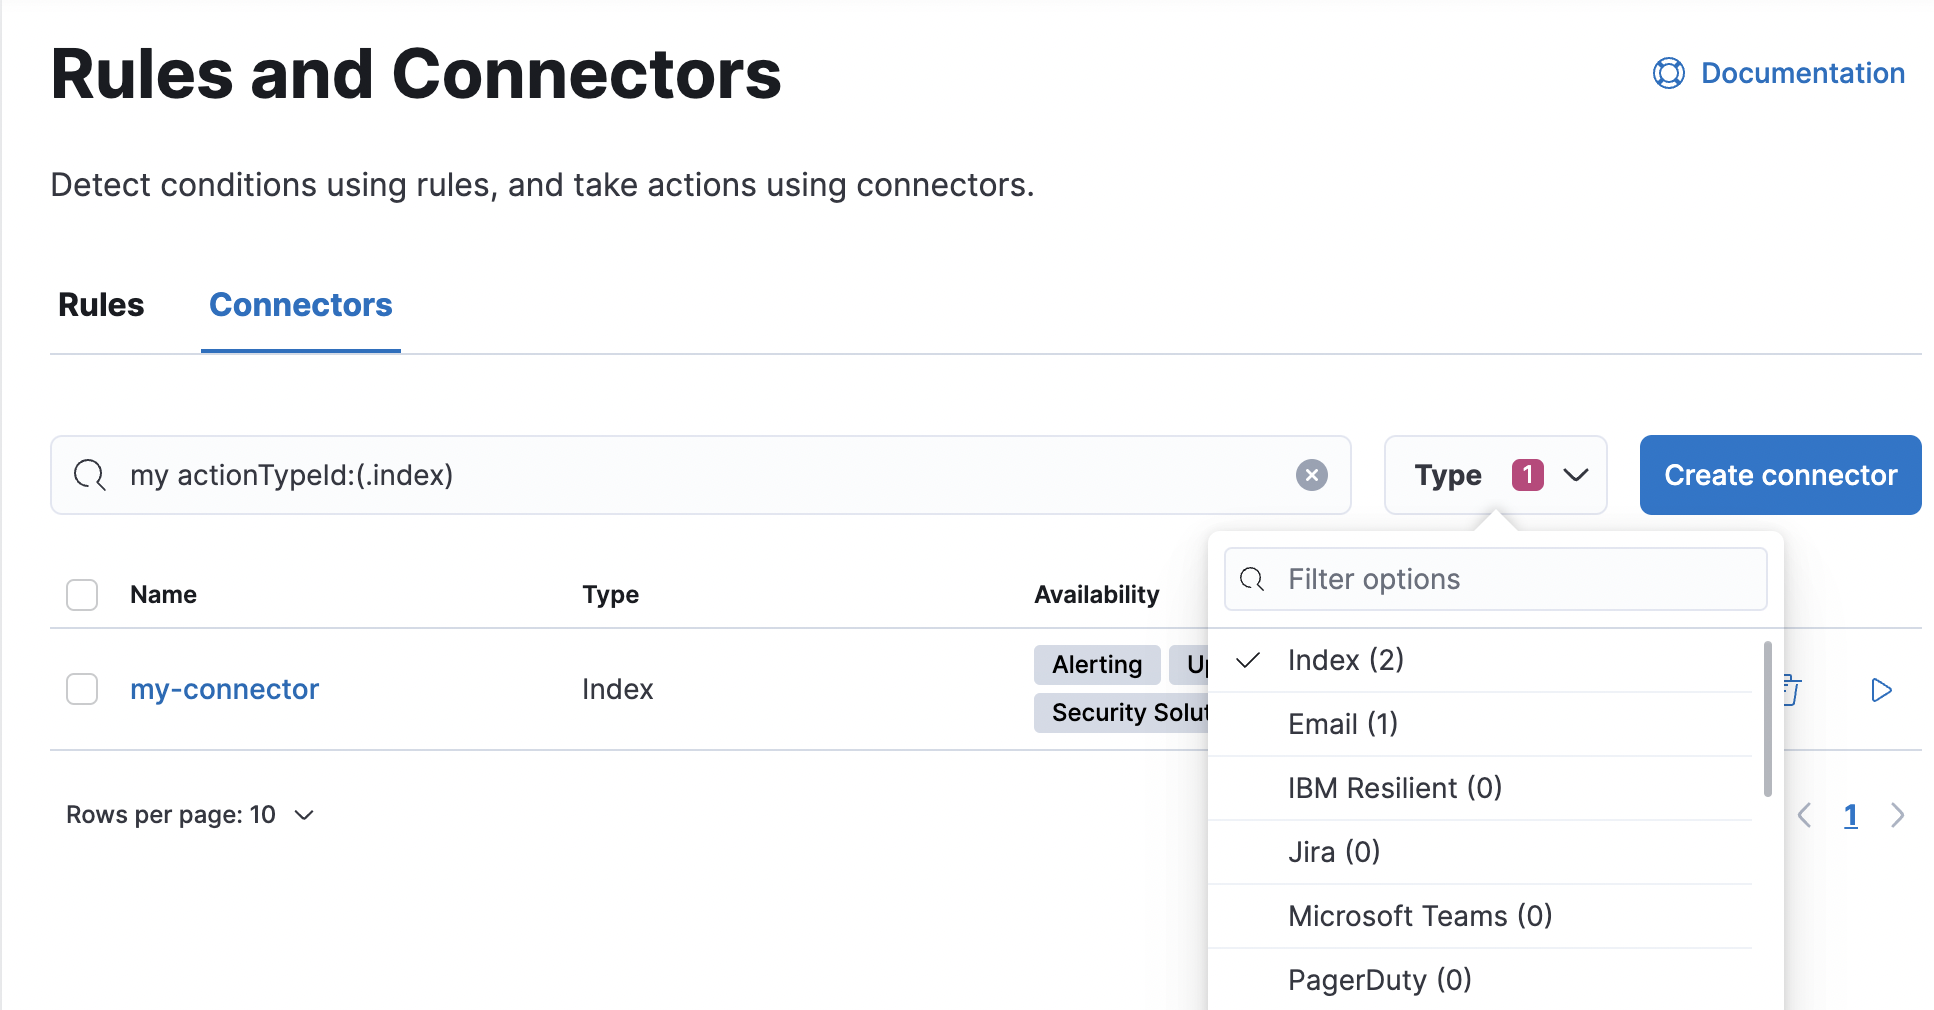 Filtering the connector list by types of connectors